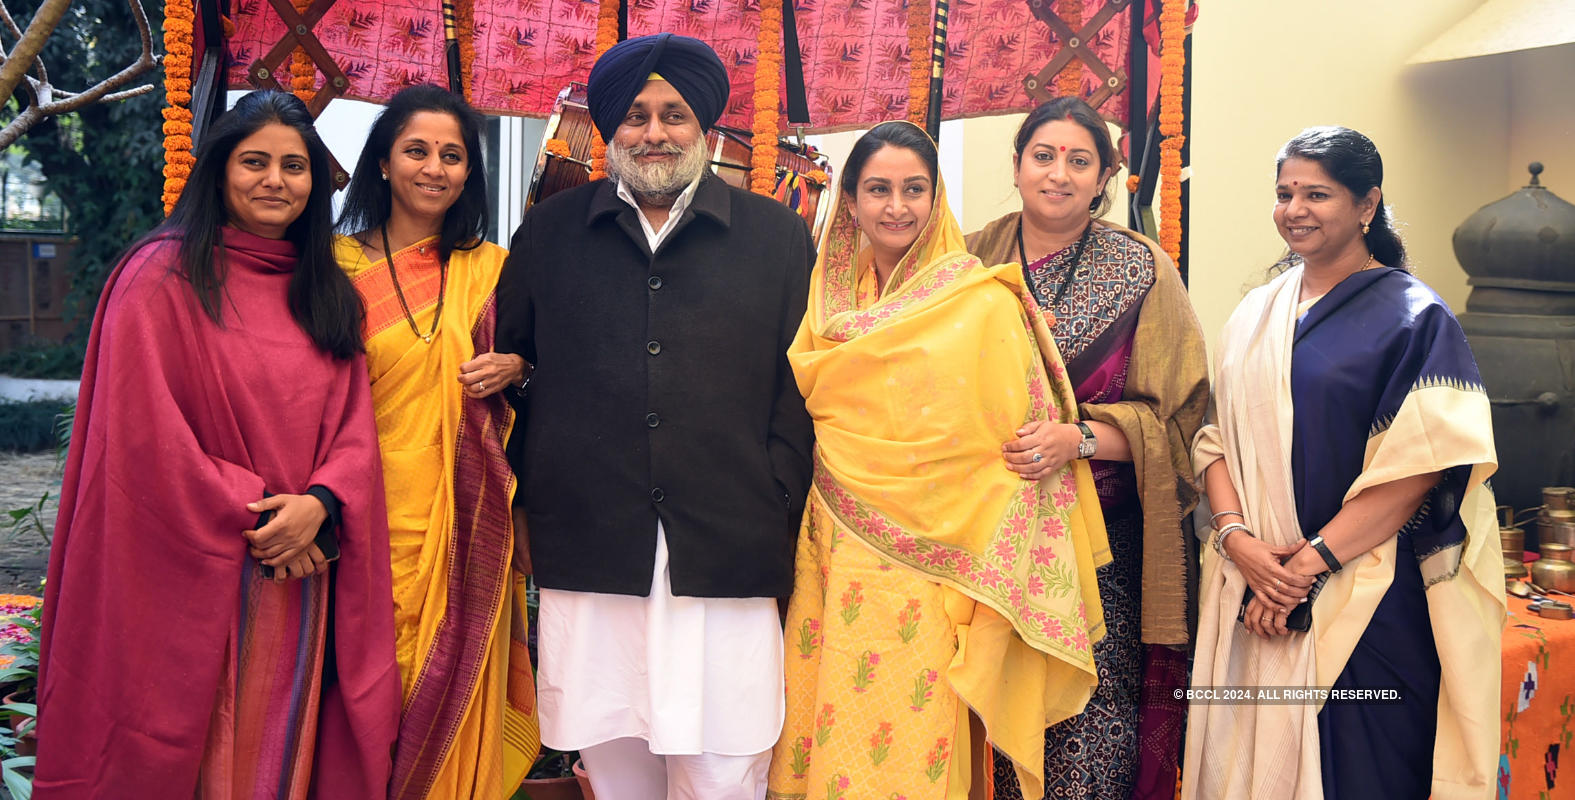 Dignitaries have a gala time at Badals’ annual luncheon